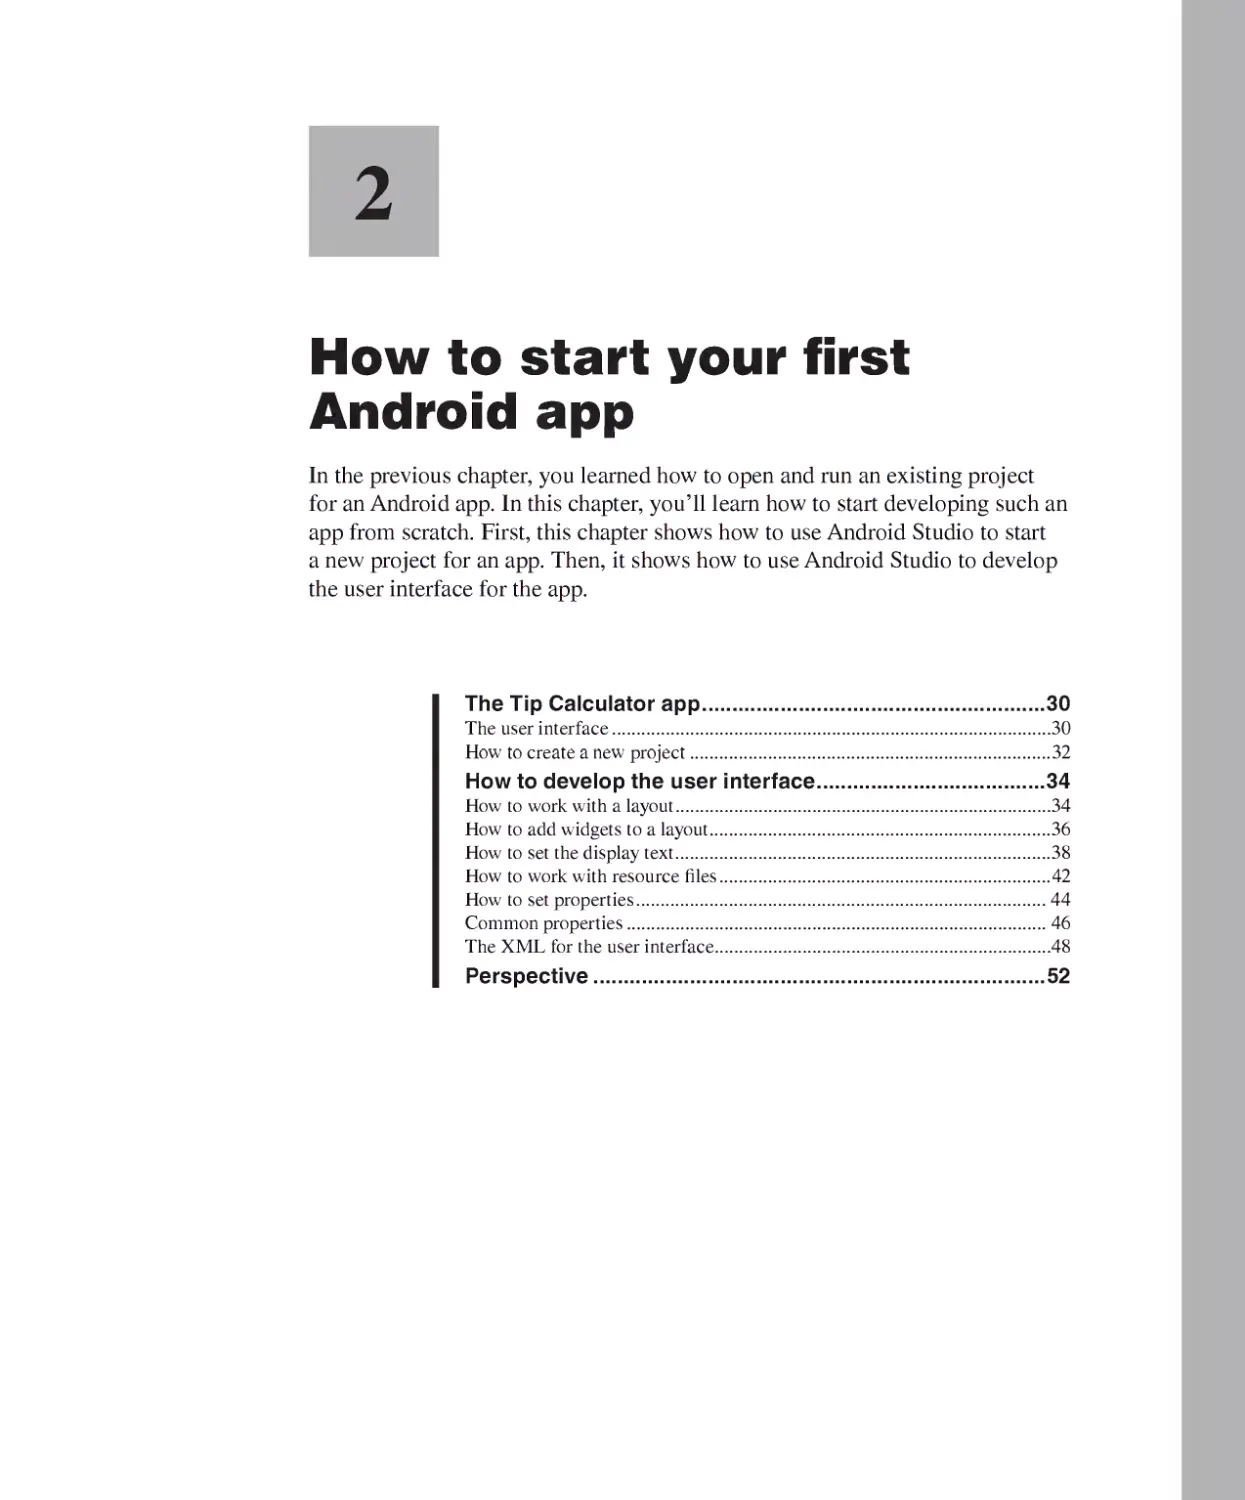 Chapter 2 - How to Start Your First Android App